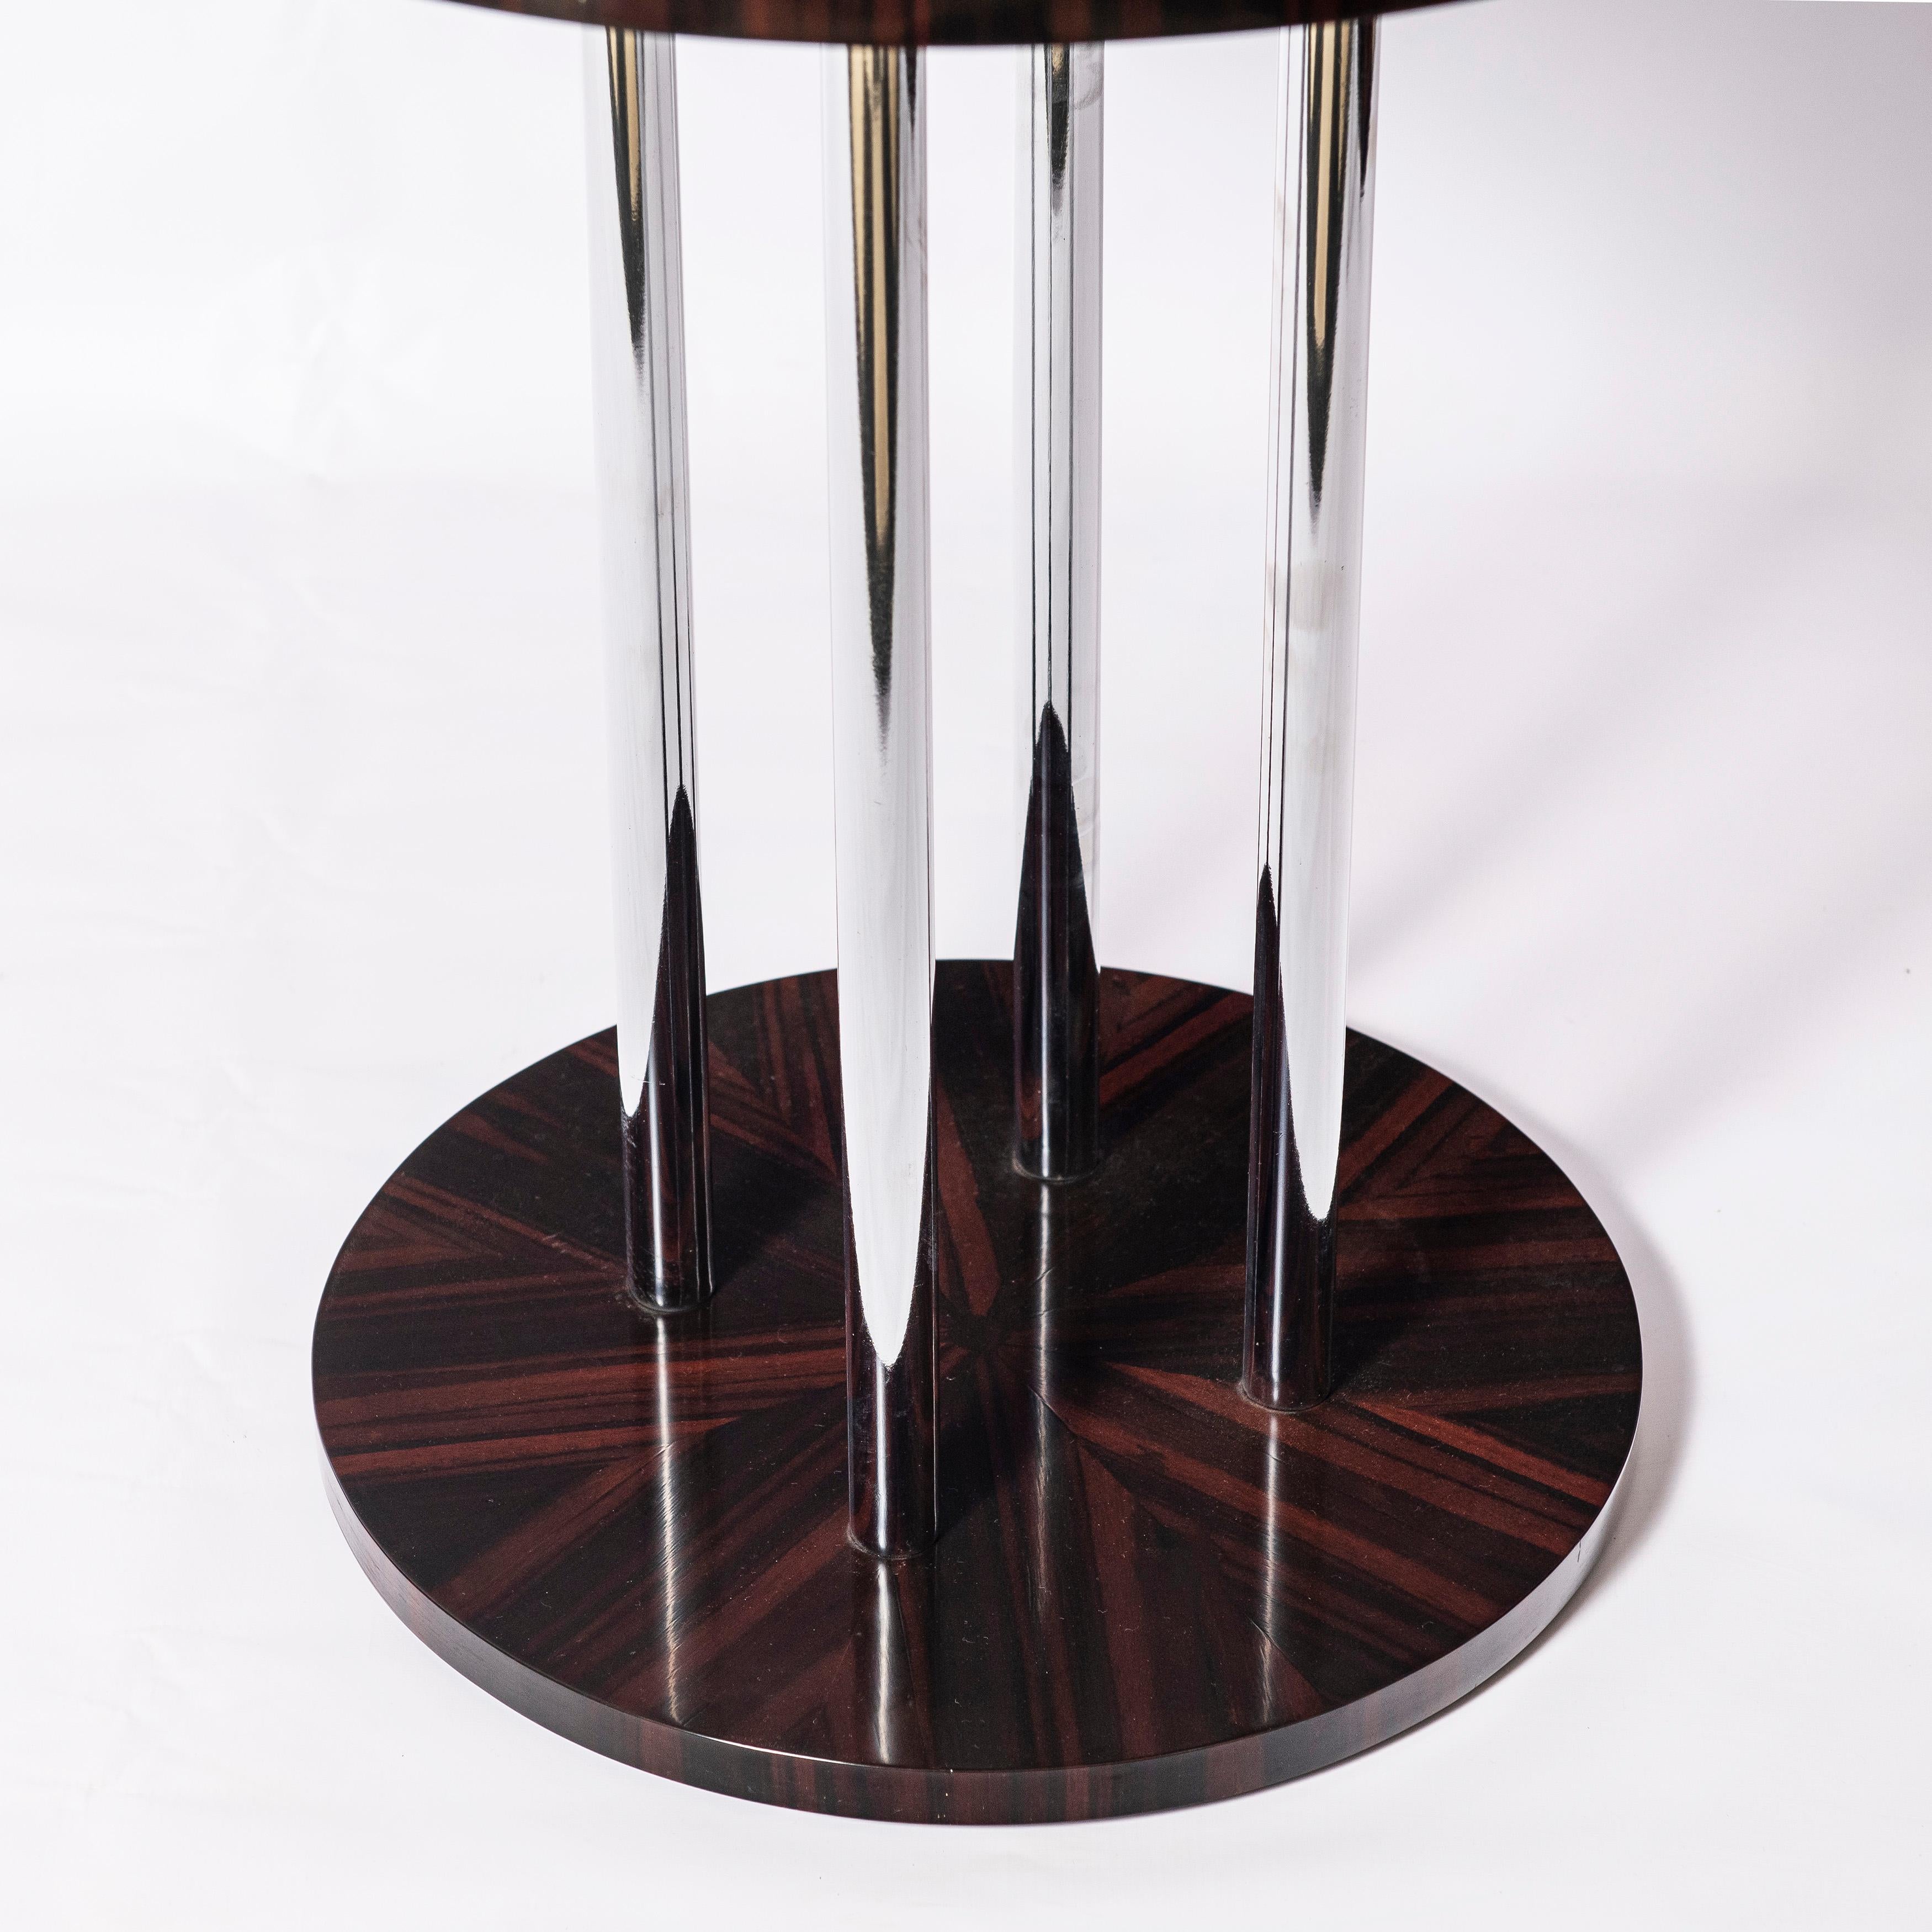 Pair of Wood and Chrome Metal Side Tables, Art Deco Period, France, circa 1940 In Good Condition For Sale In Buenos Aires, Buenos Aires